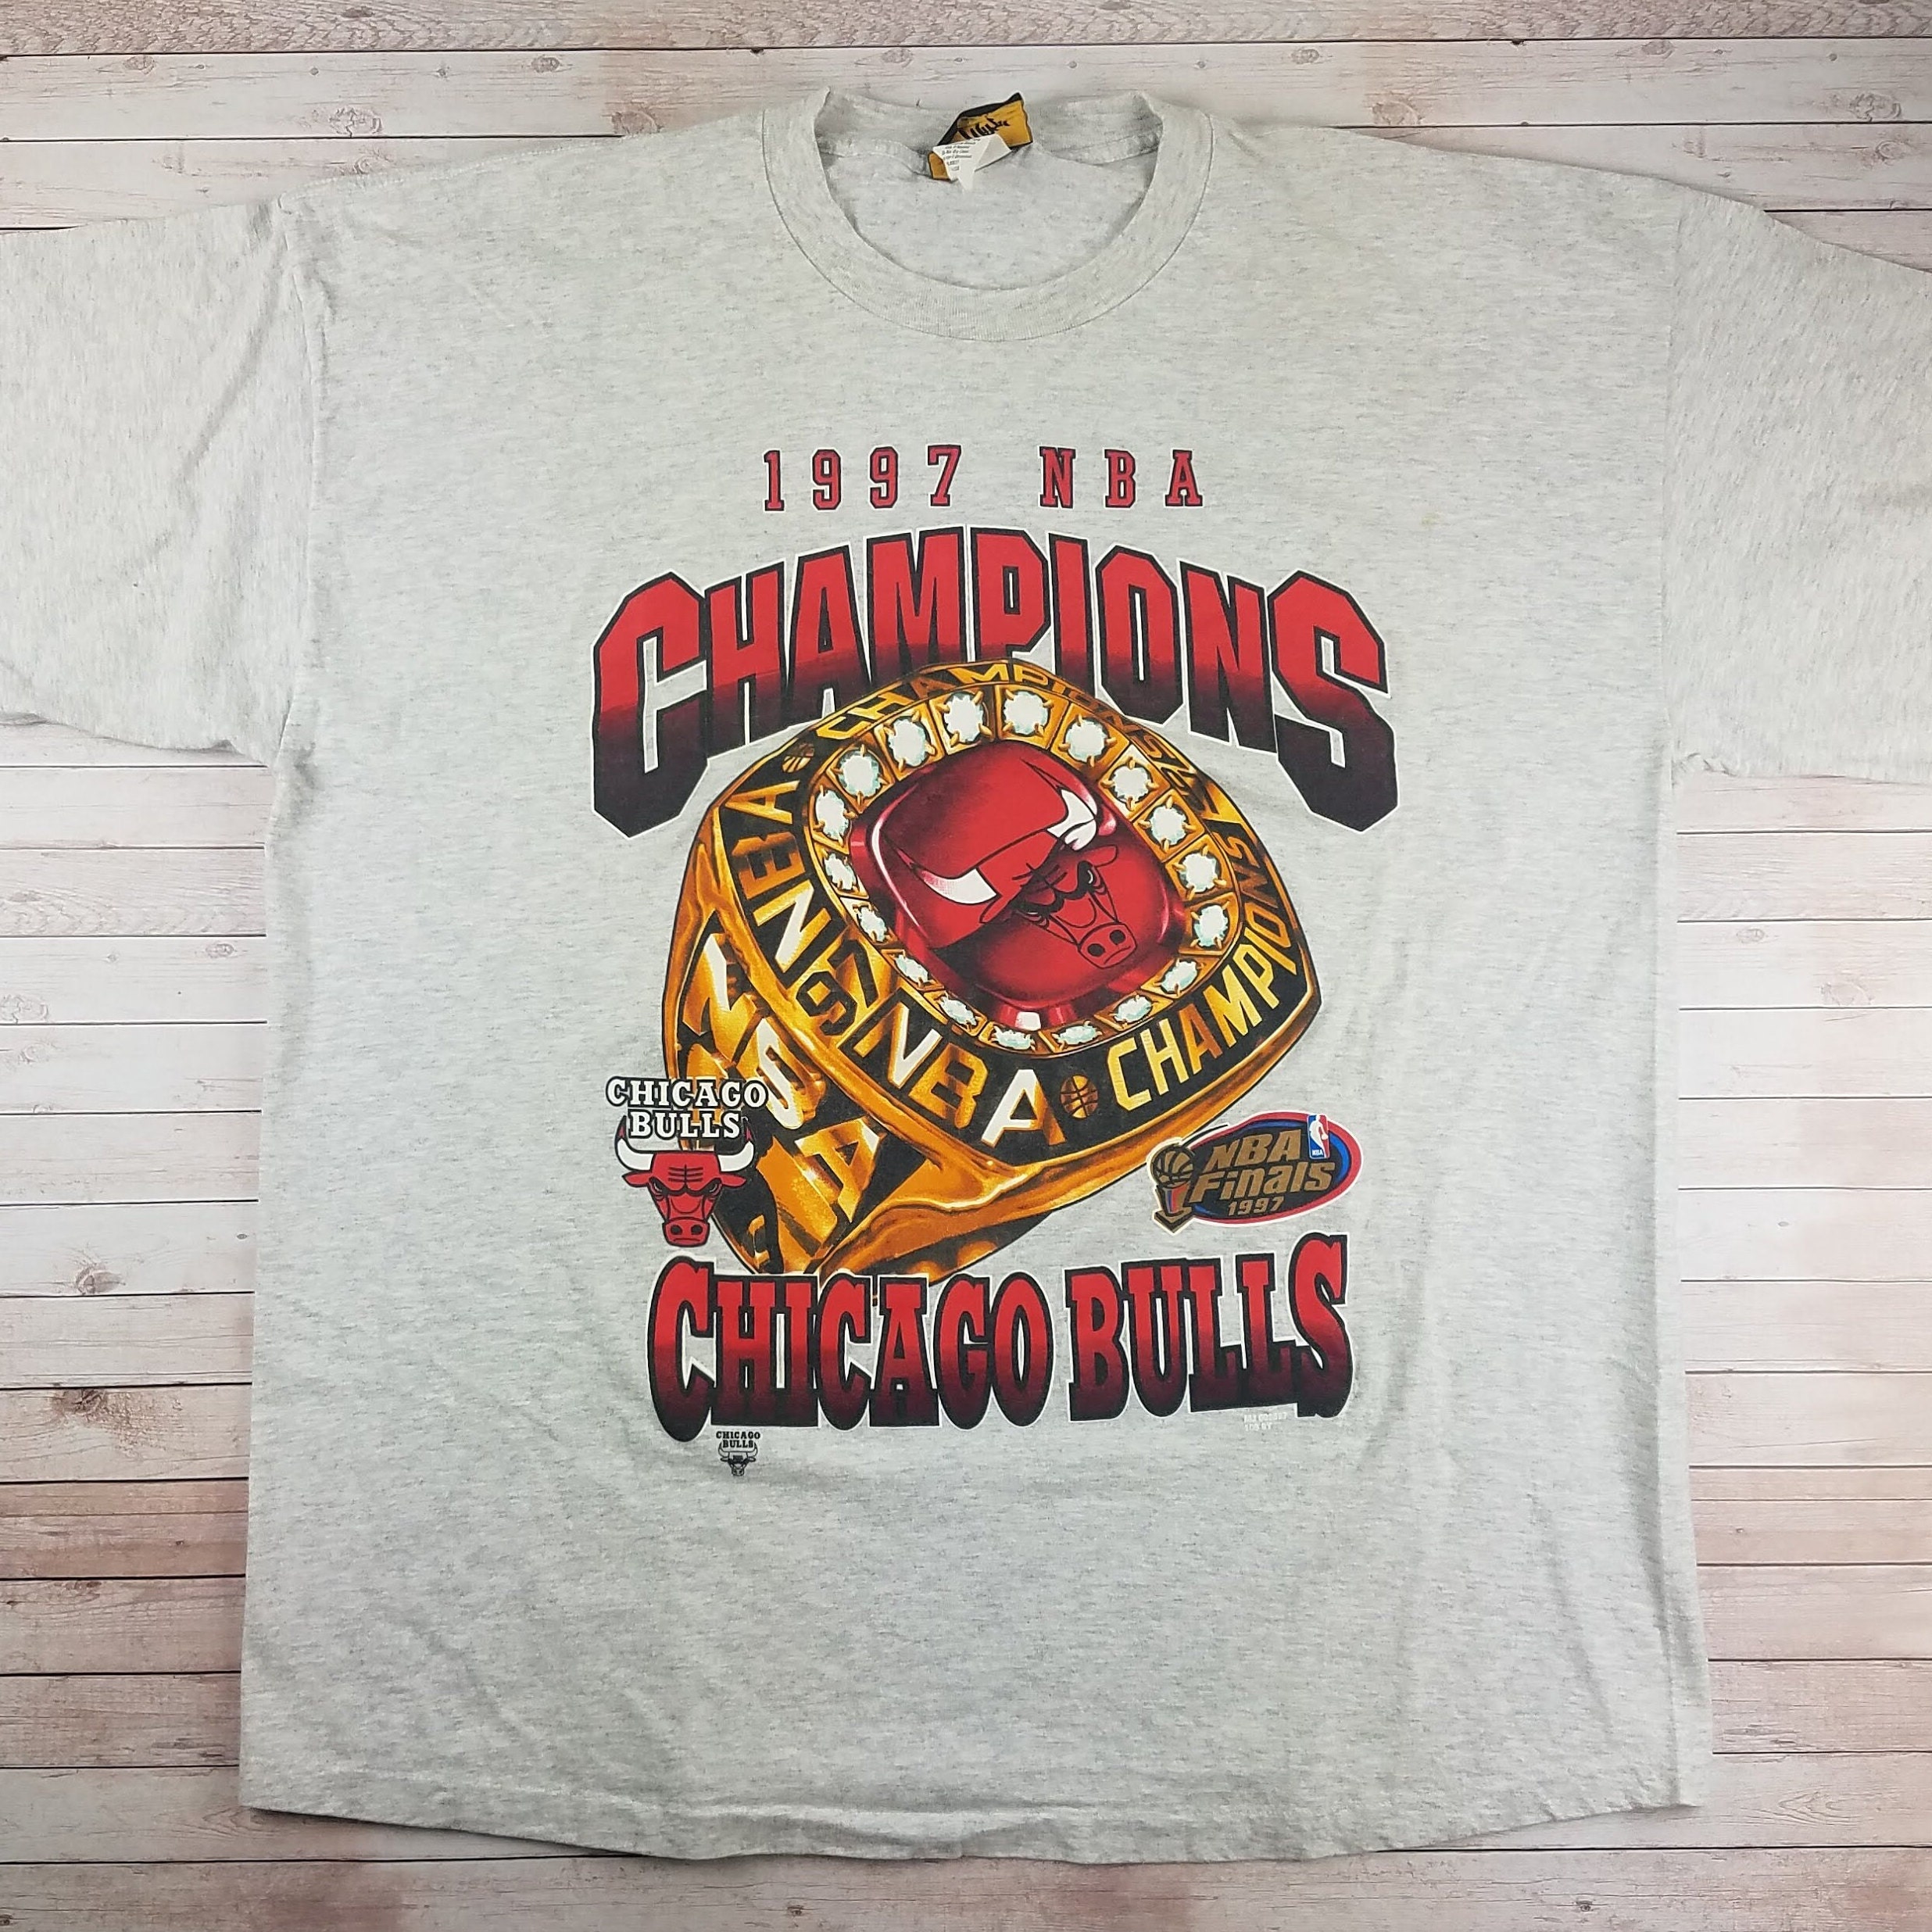 Dry Rot Vintage 1998 Chicago Bulls Double 3peat Rap Tee T-Shirt